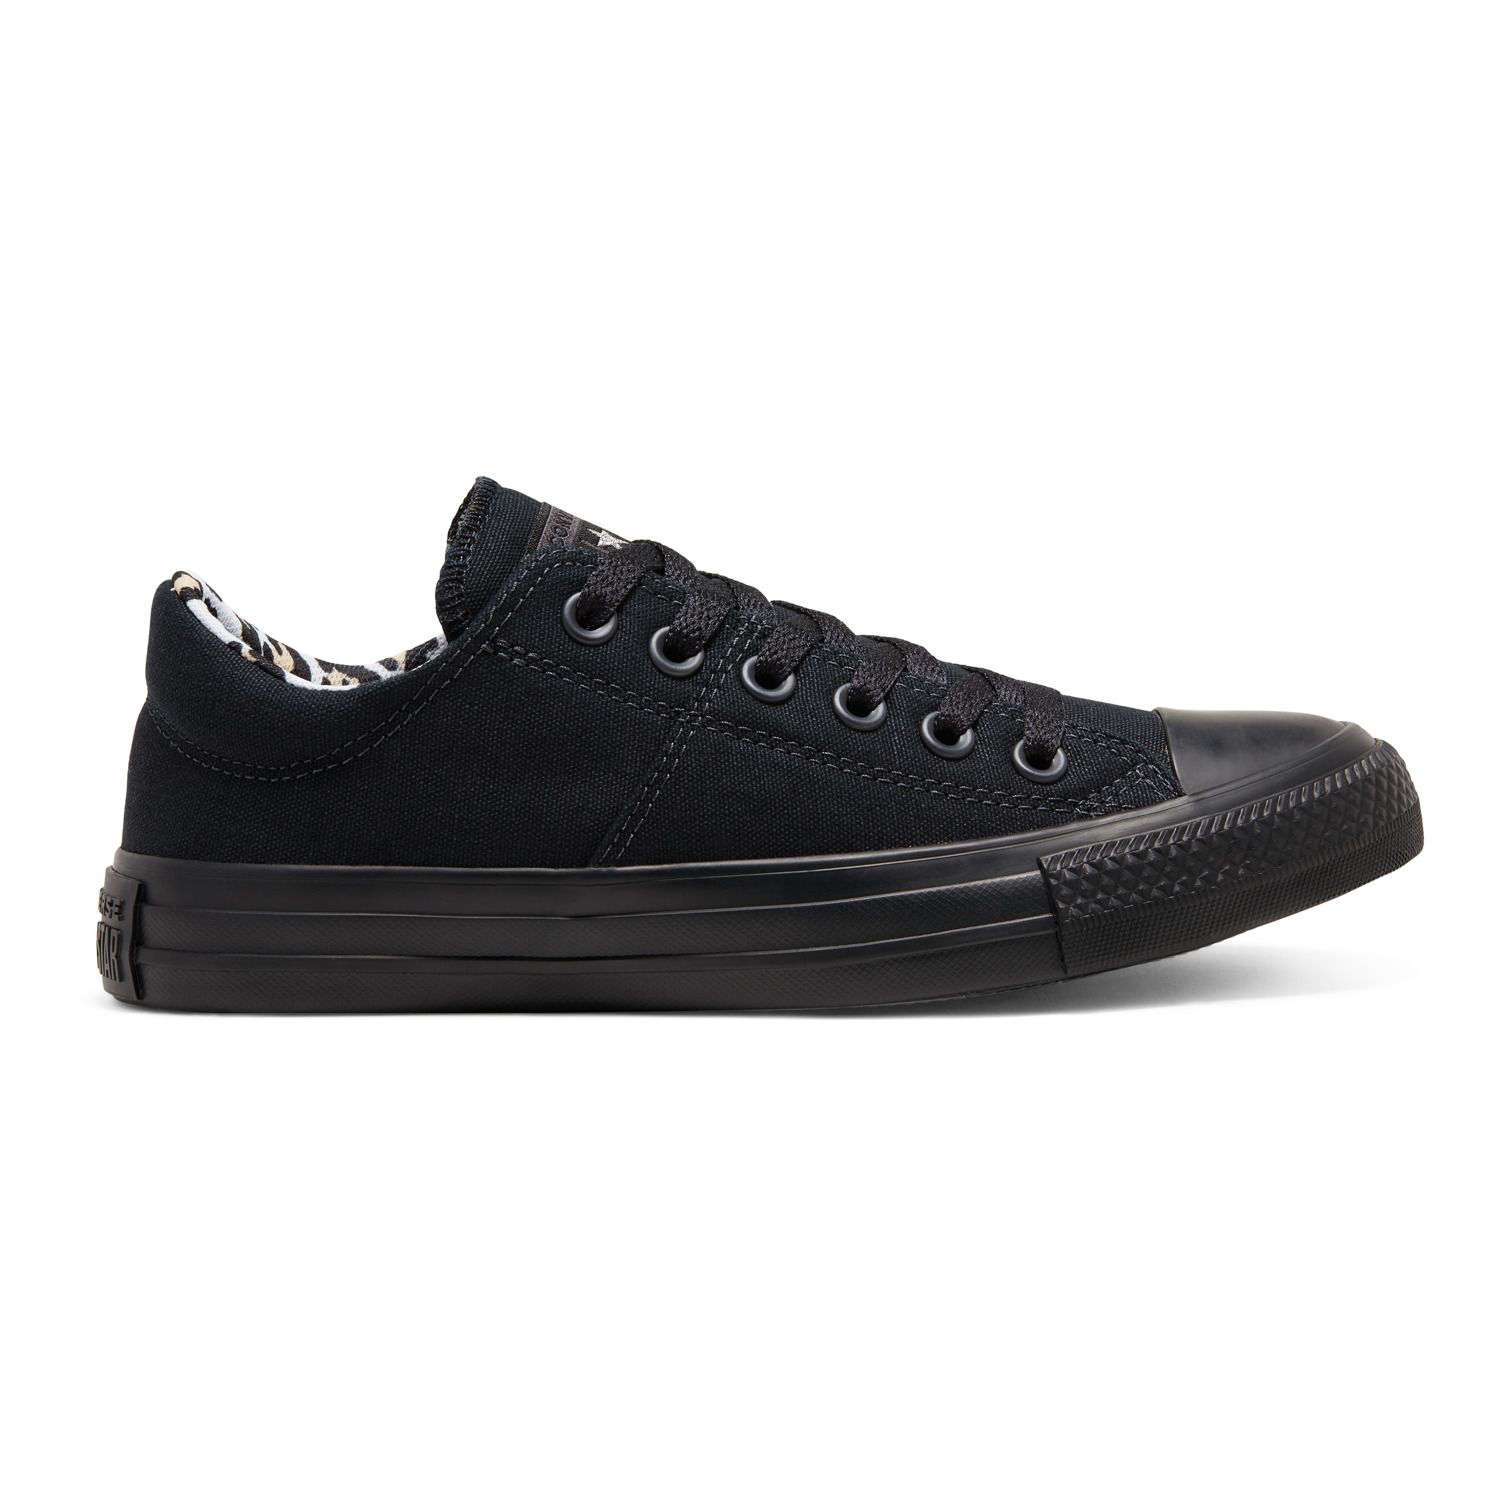 converse chuck taylor all star madison low top